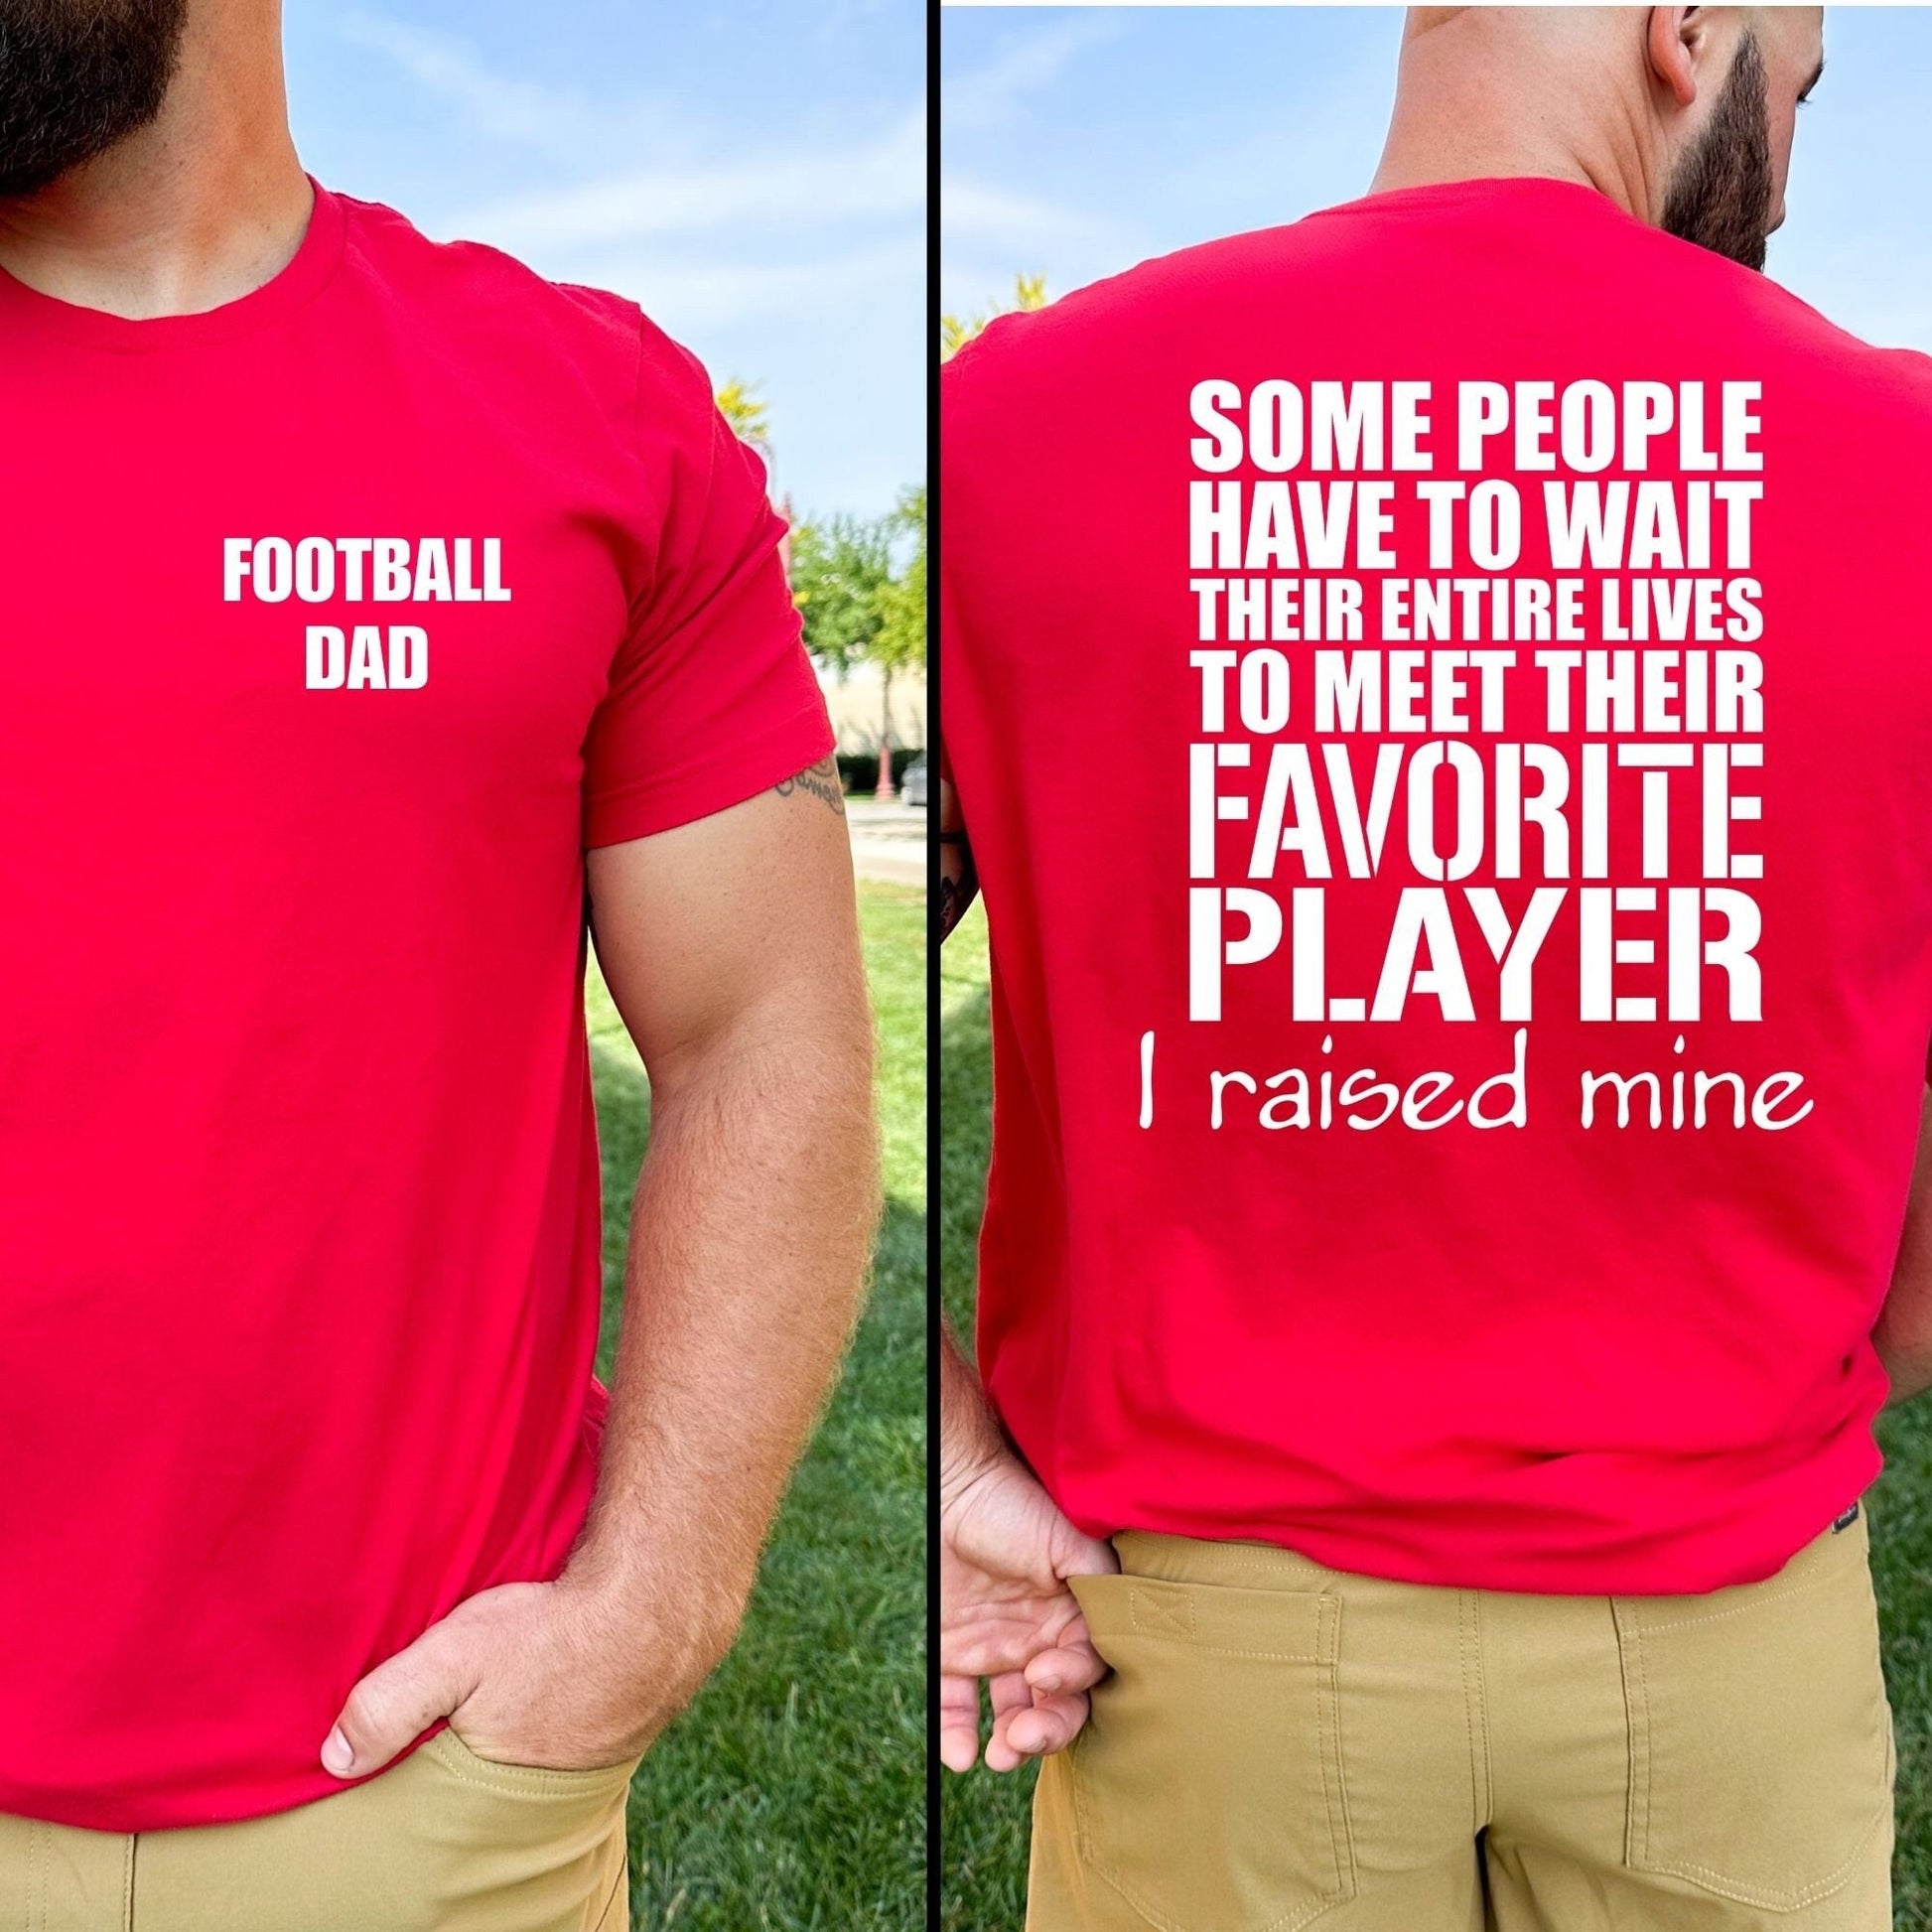 Football Dad Shirt, Football dad Tee Football Dad T Shirt, football apparel, football dad gift, gift for dad, christmas gift fathers day - SBS T Shop